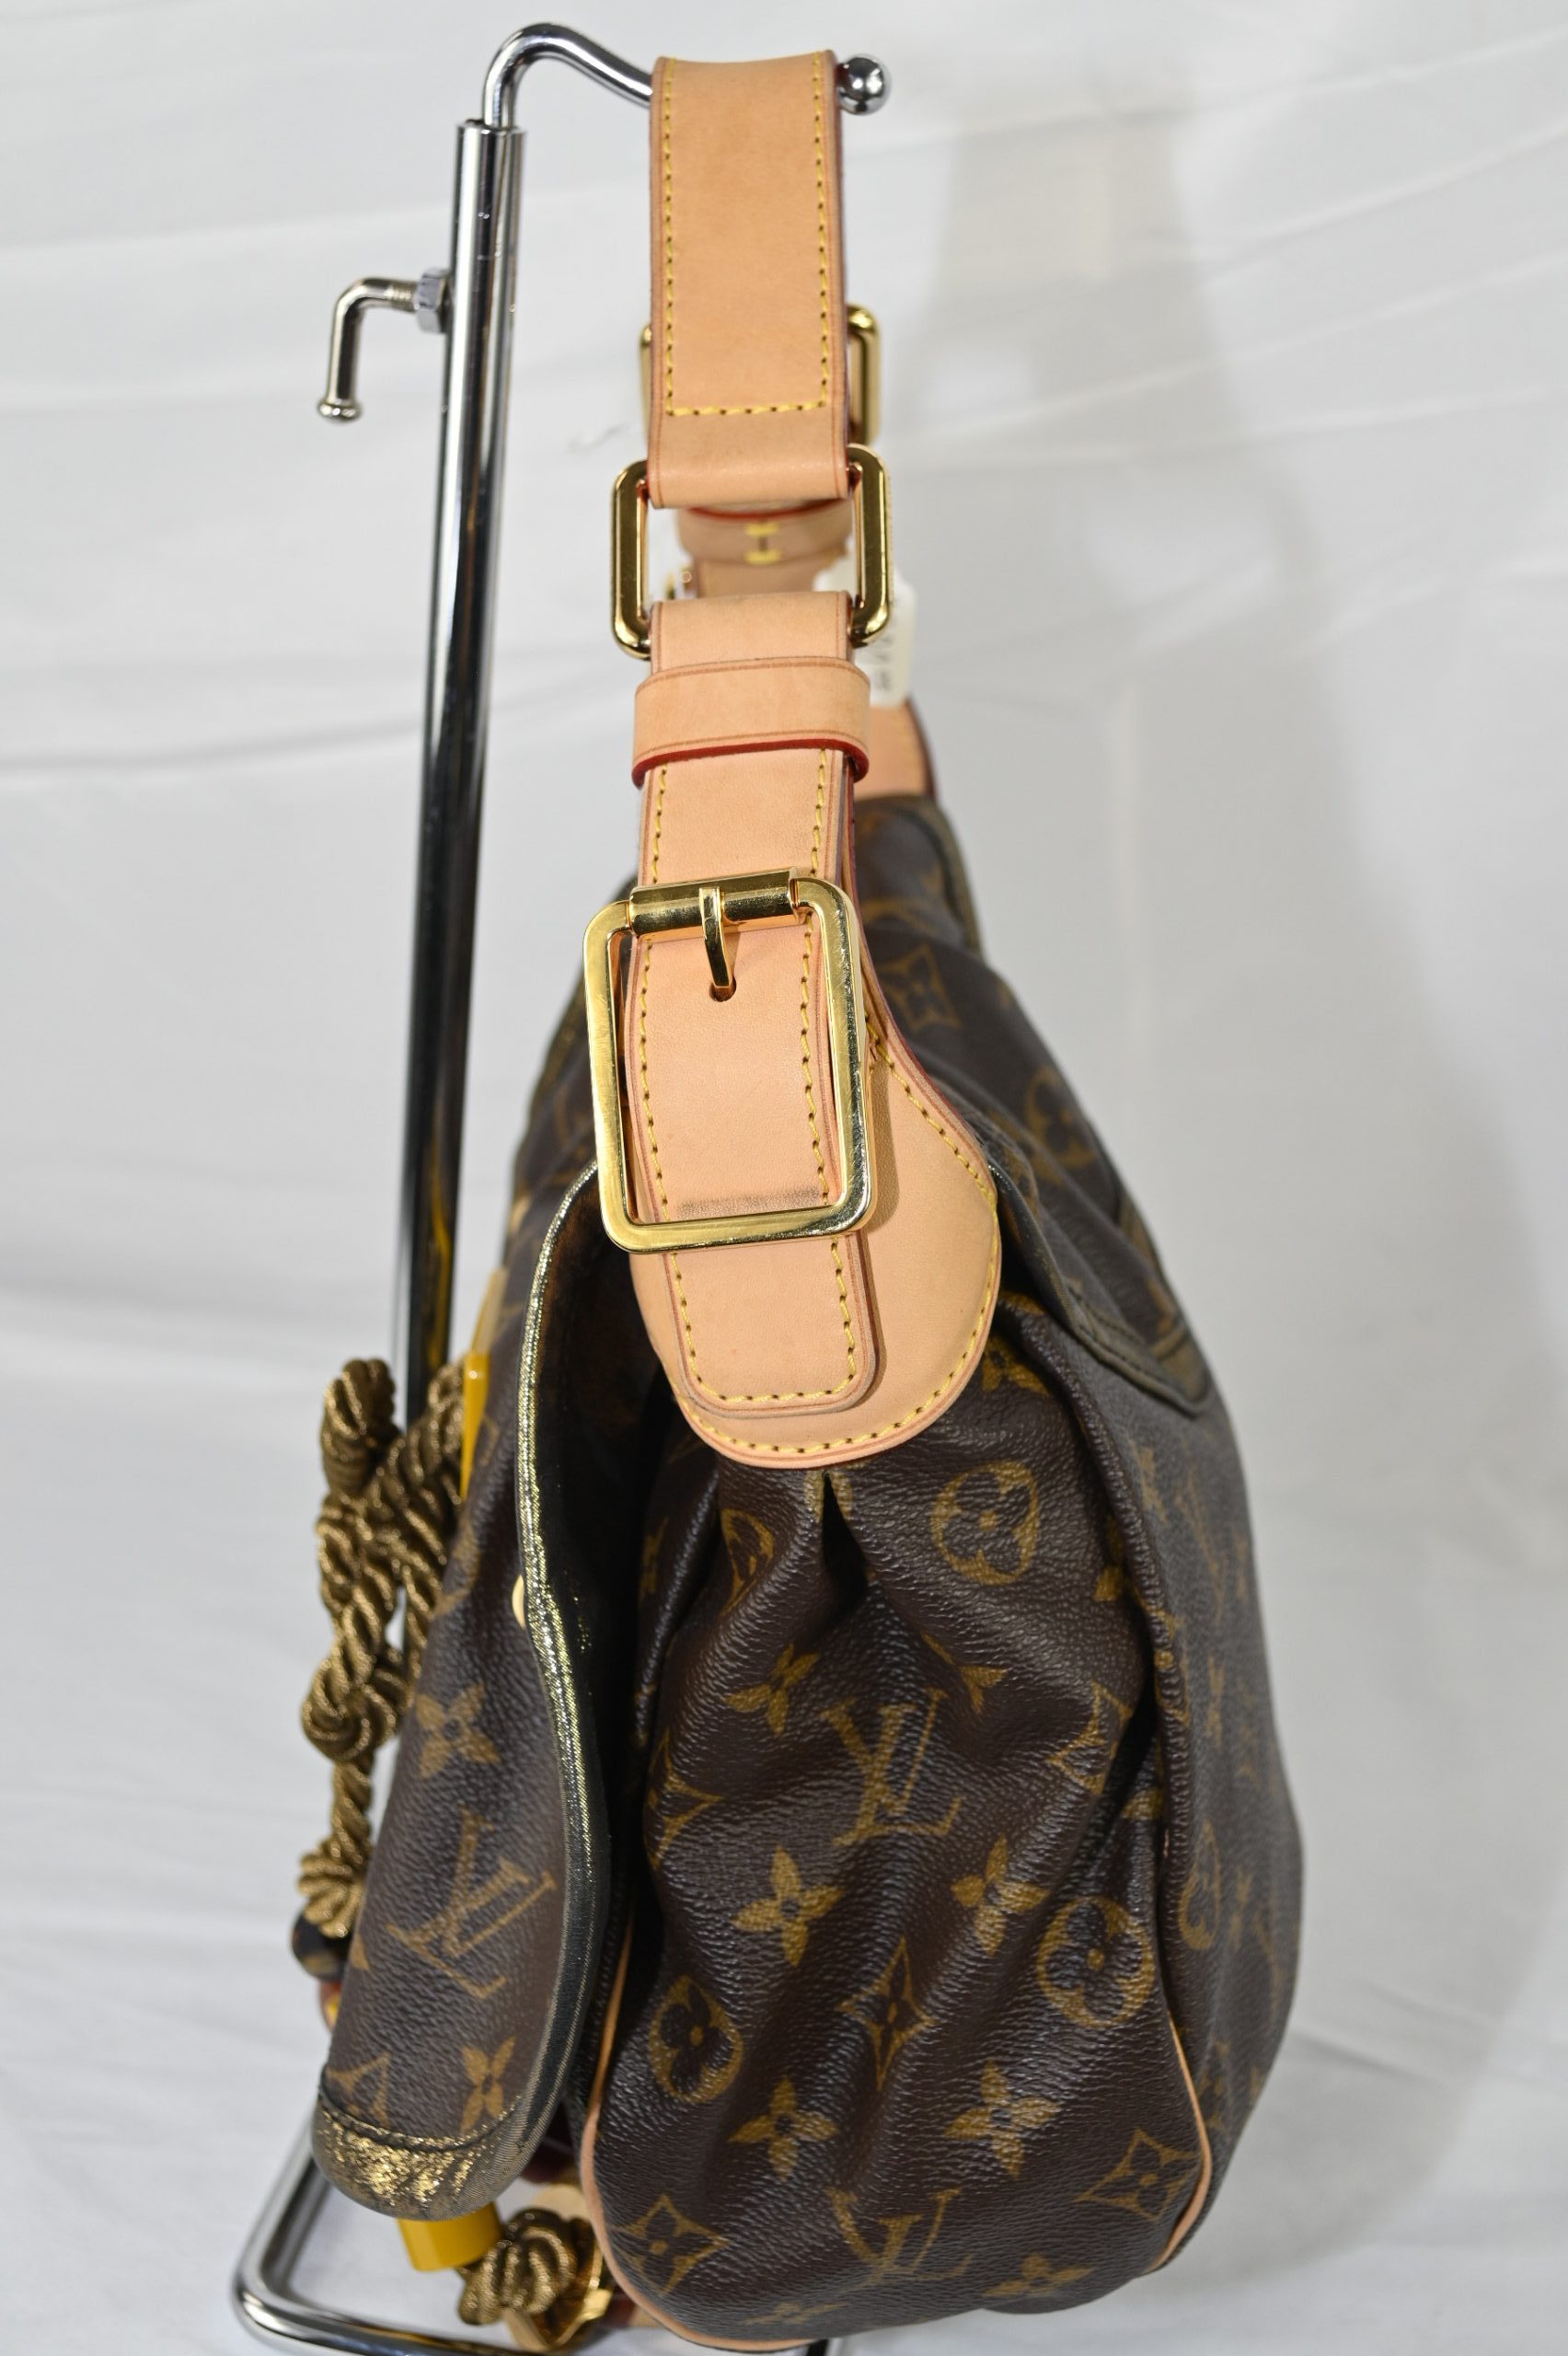 Gugus - Louis Vuitton Madonna Kalahari GM bag Release in 2009 as a limited  edition Perfect for unique and ethnic look #Louisvuitton #Madonna #Kalahari  #luxurybag #luxury #muse #gugus Get more info below